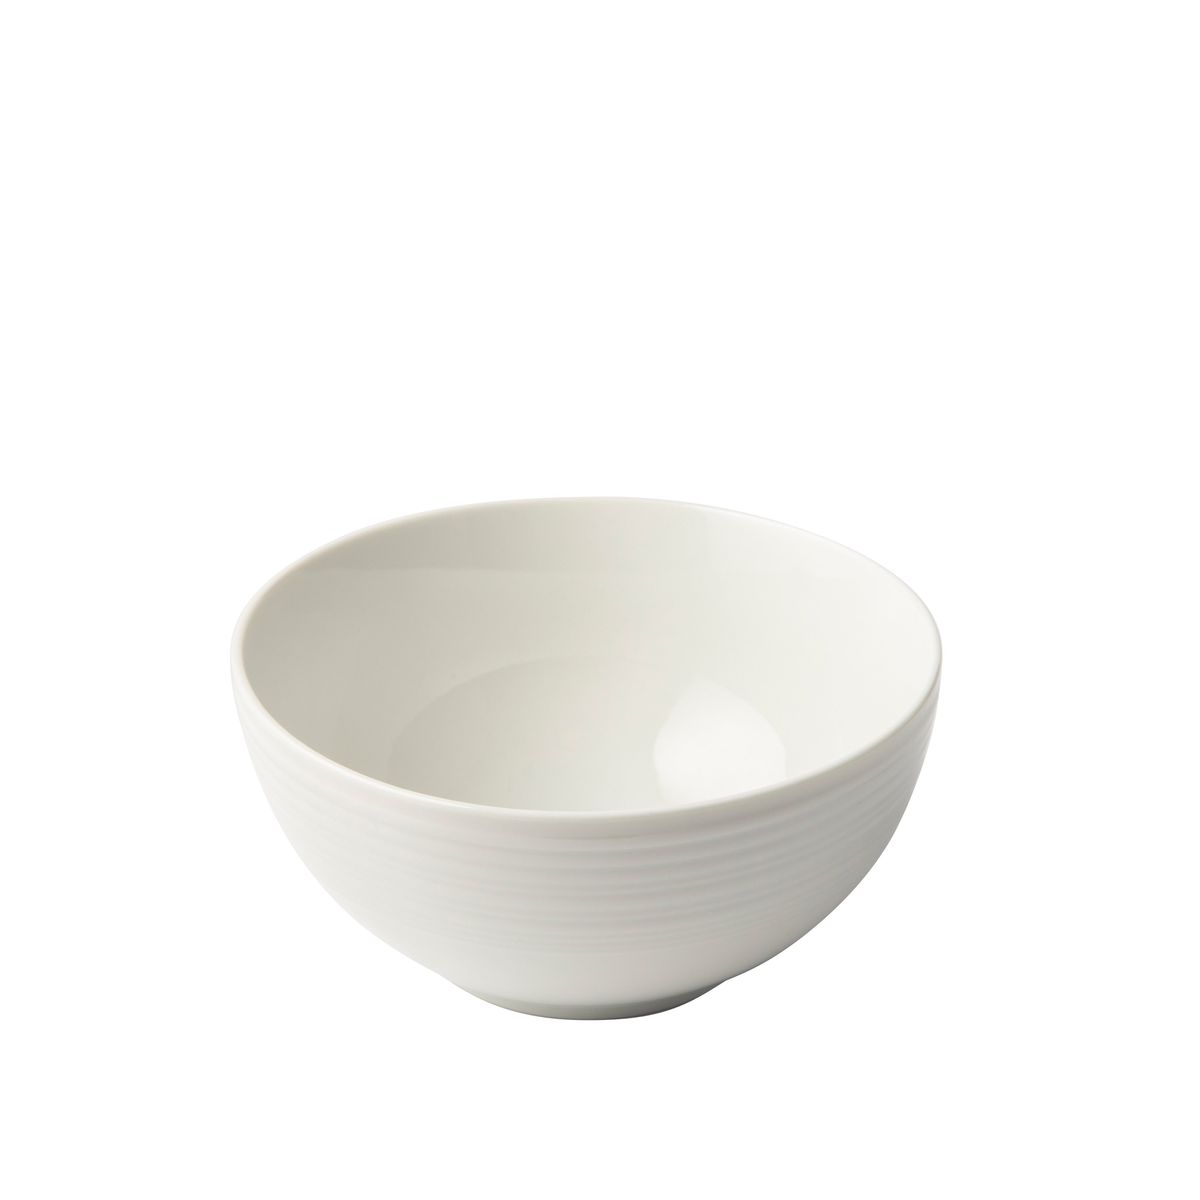 Jenna Clifford Embossed Lines Cream White Cereal Bowl Set of 4